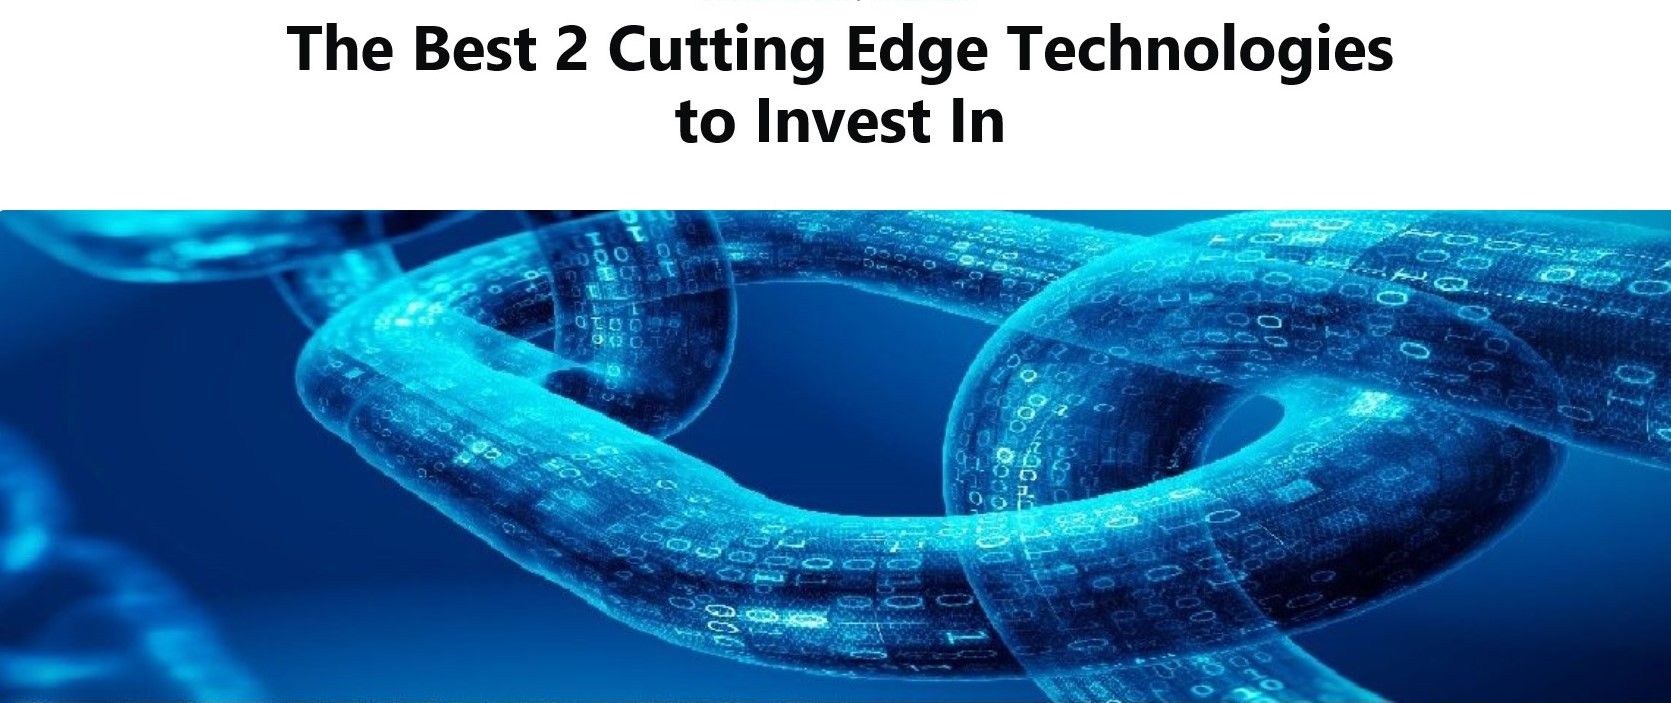 Top 5 Cutting Edge Technologies Not To Invest In 